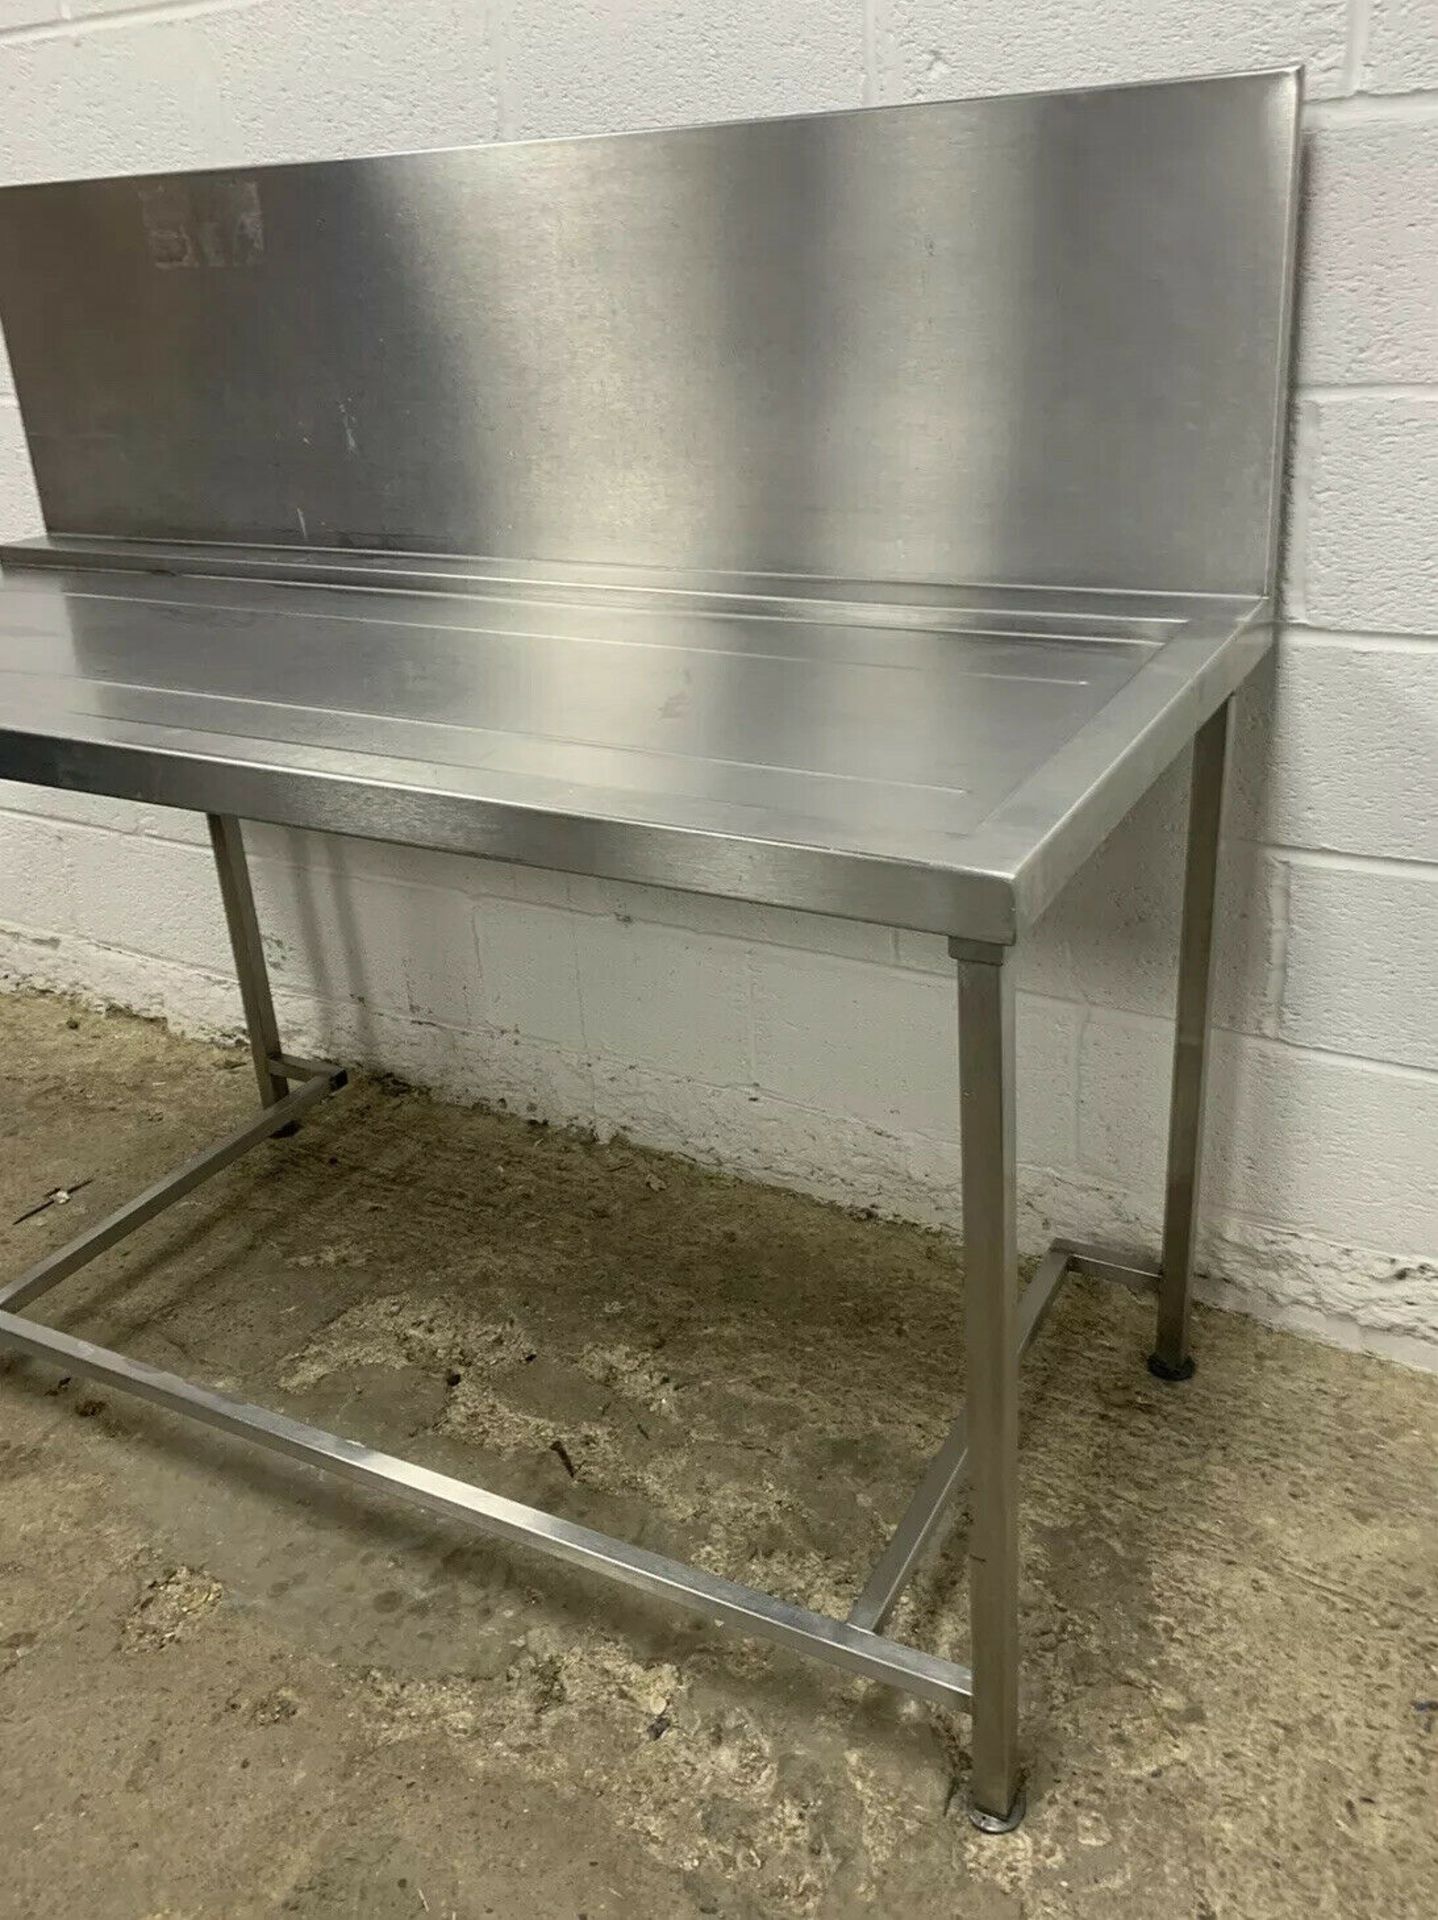 Stainless Steel Dishwasher Outlet / Exit Table with High Upstand - Image 2 of 3